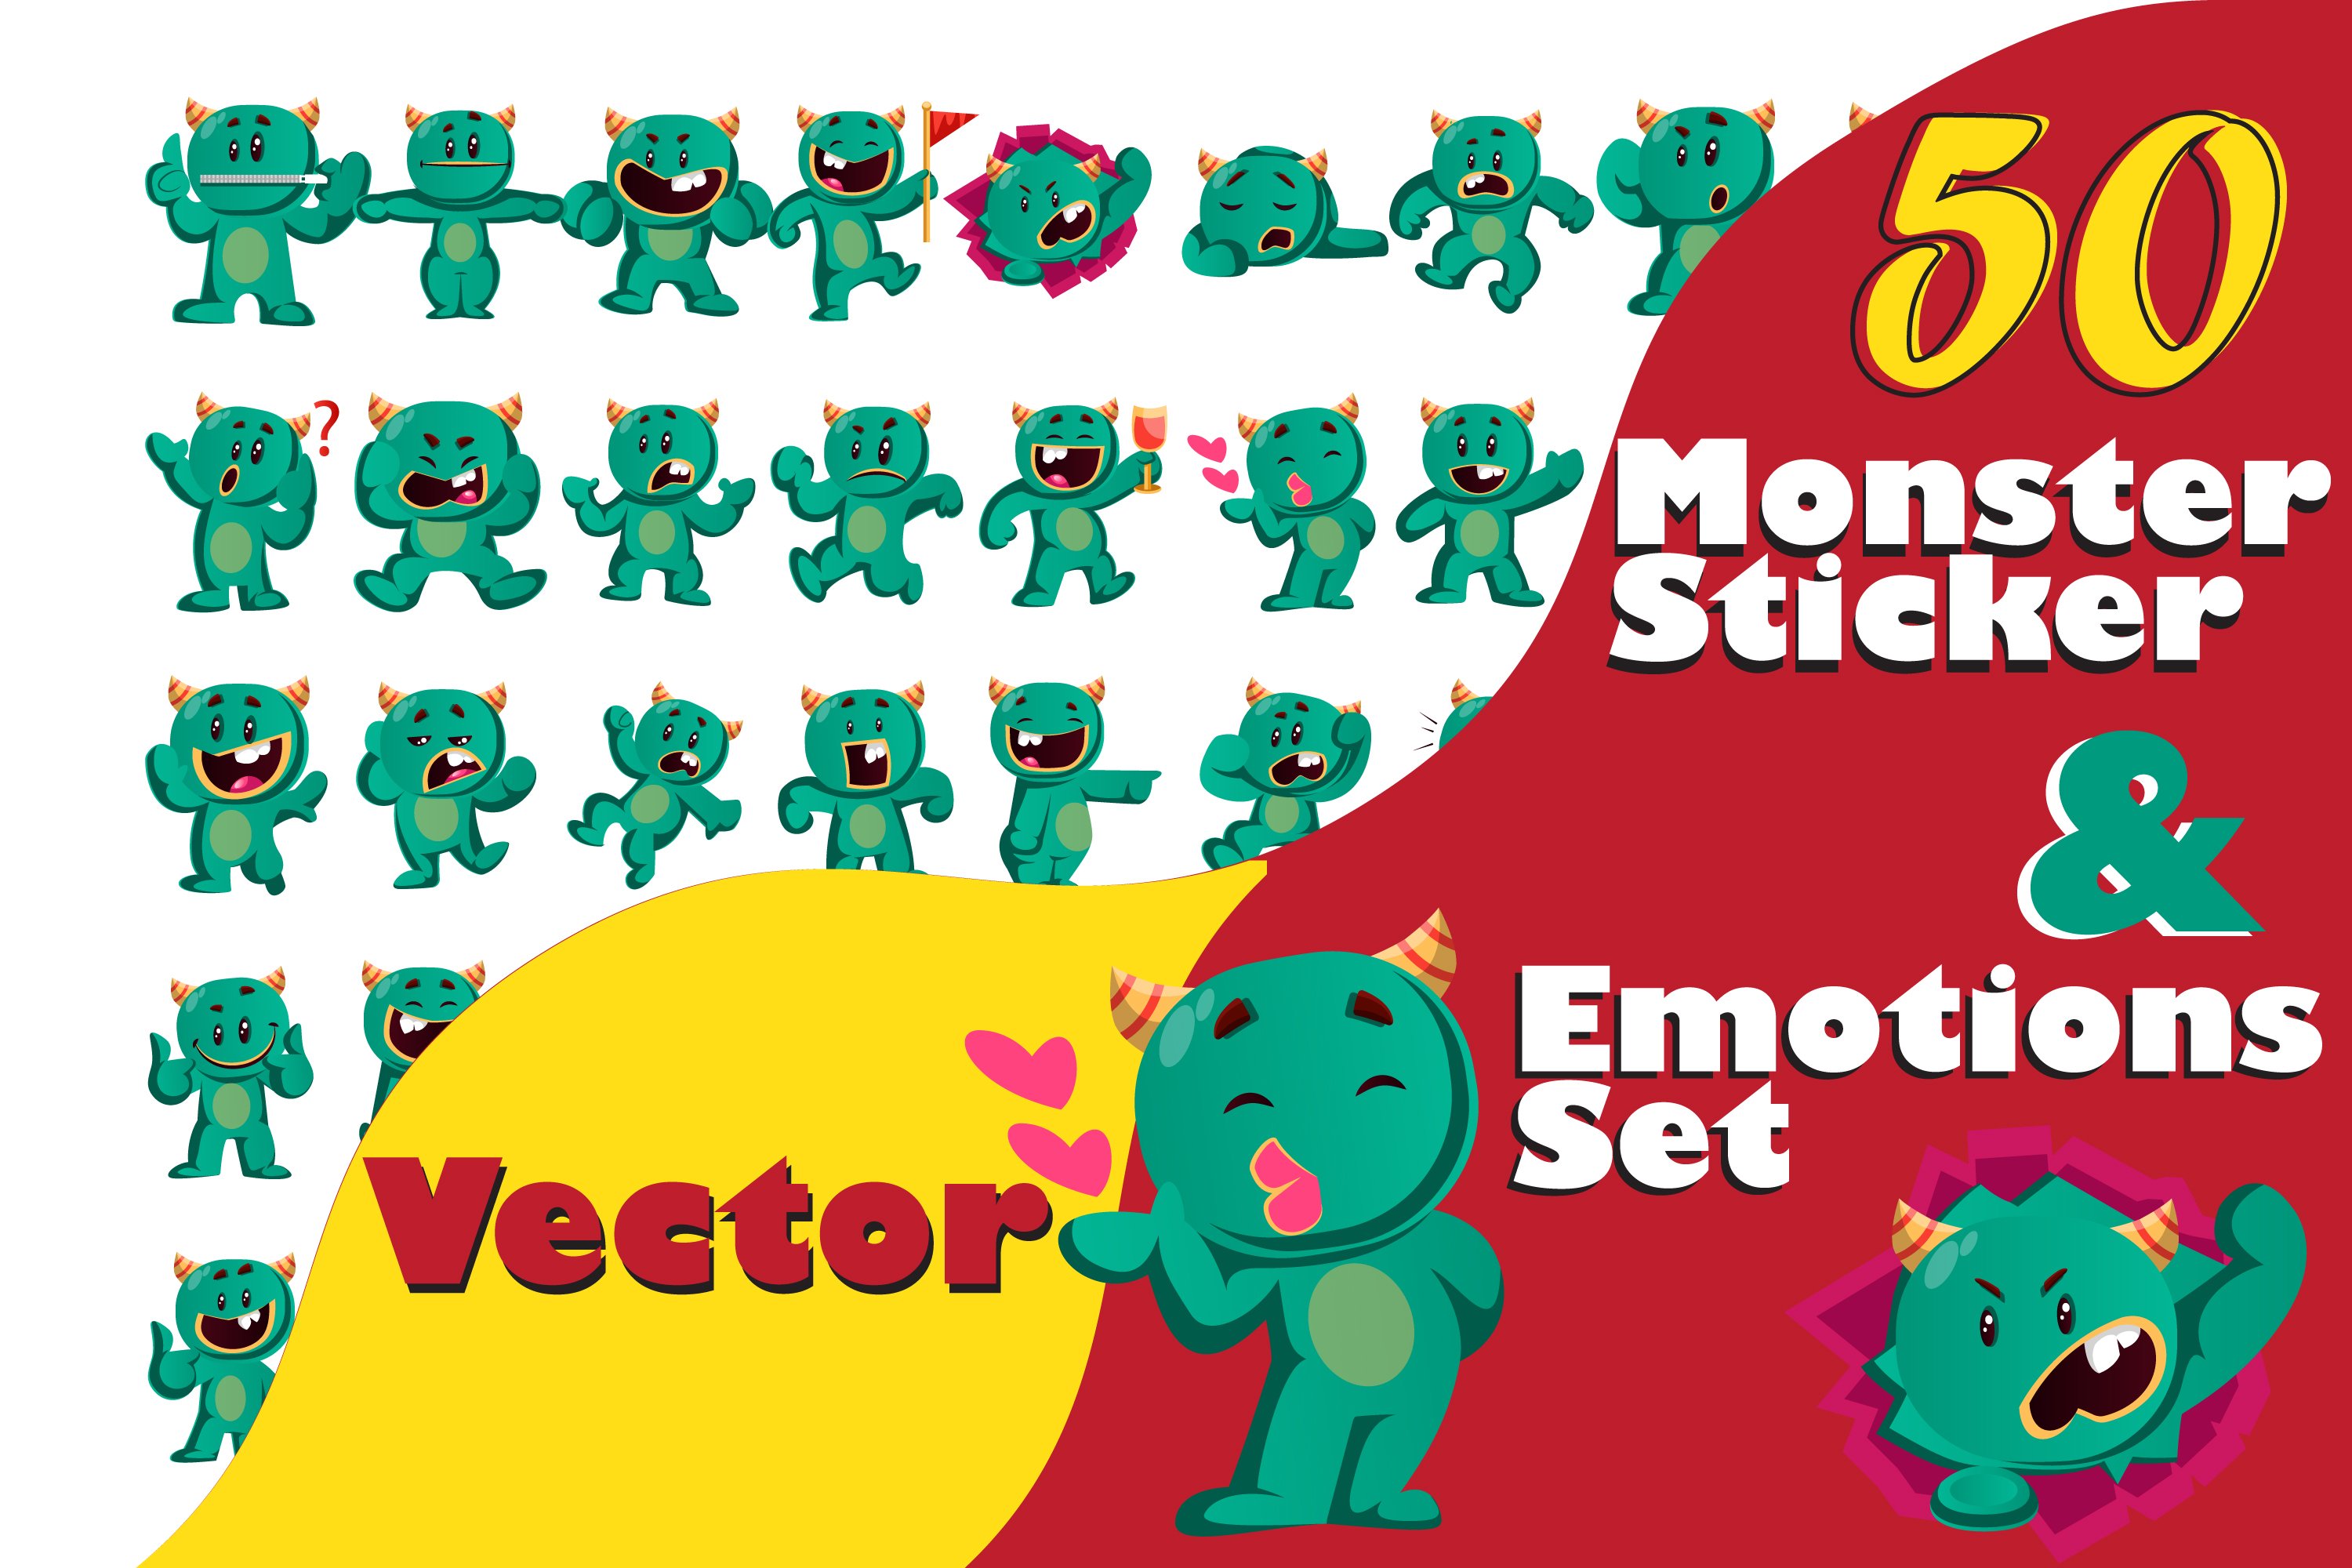 So cute green monster with him emotions.